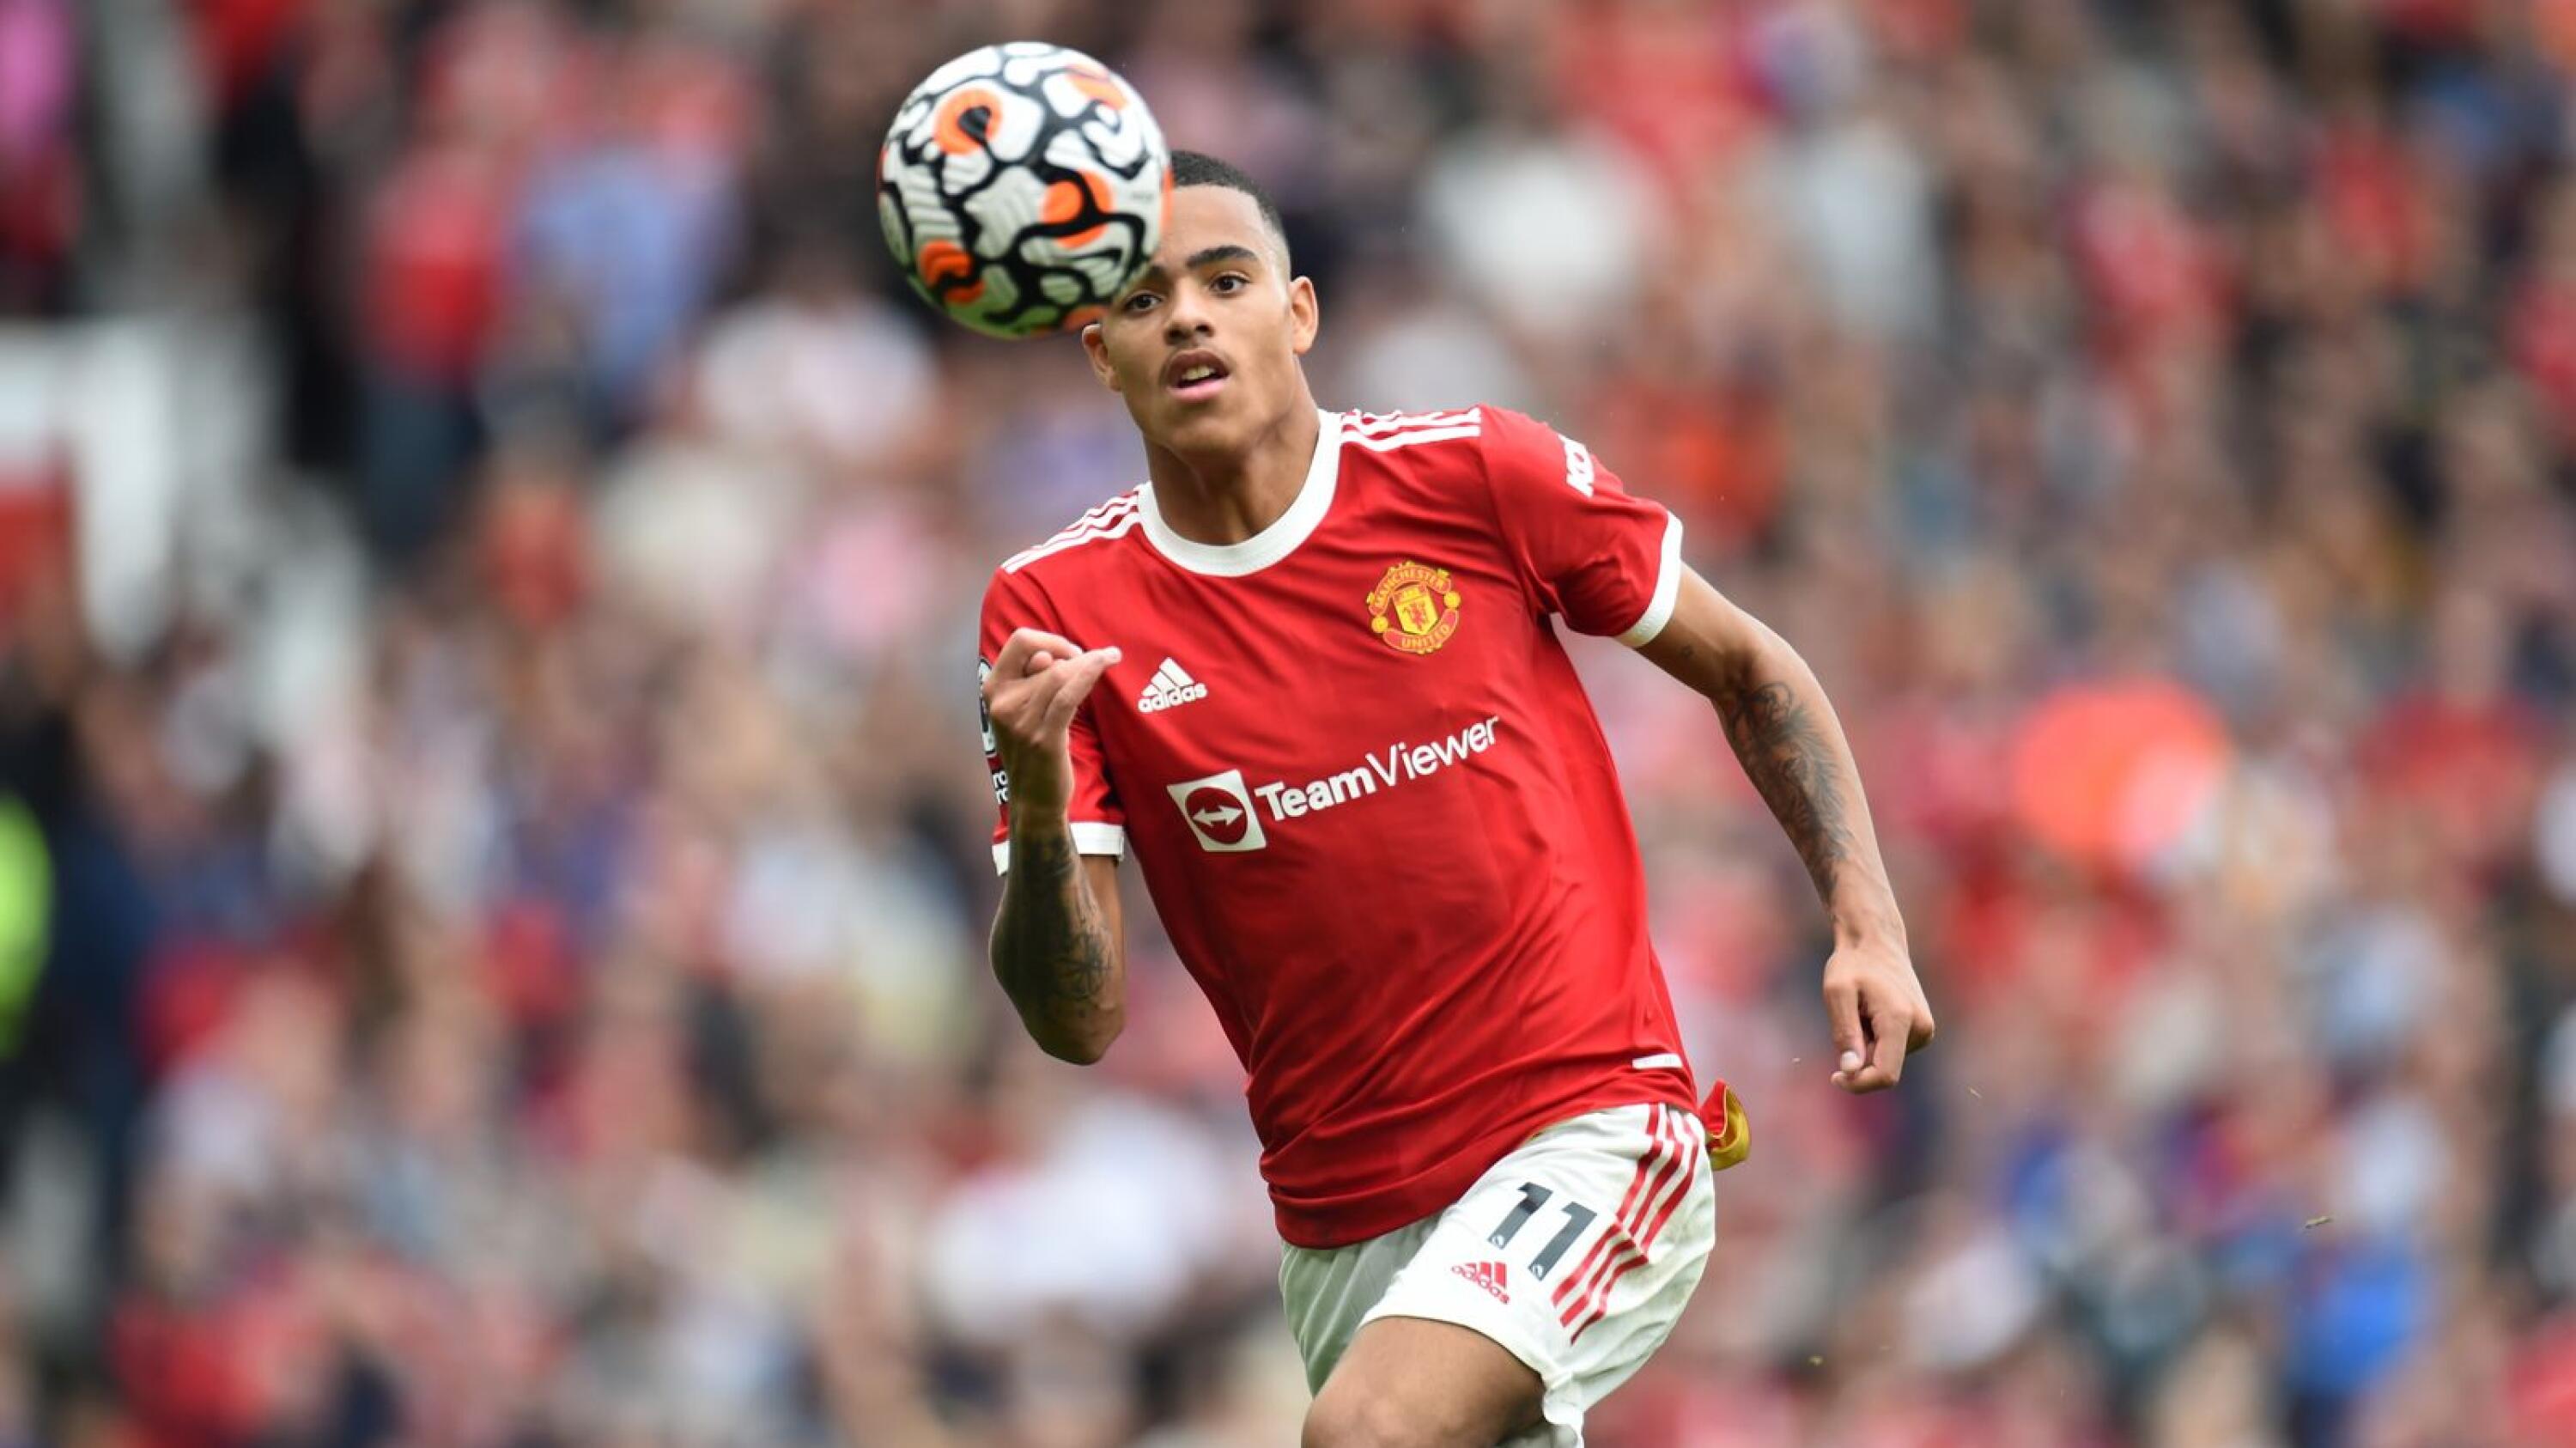 Mason Greenwood of Manchester United in action during their English Premier League soccer match against Aston Villa at Old Trafford in Manchester on 25 September 2021